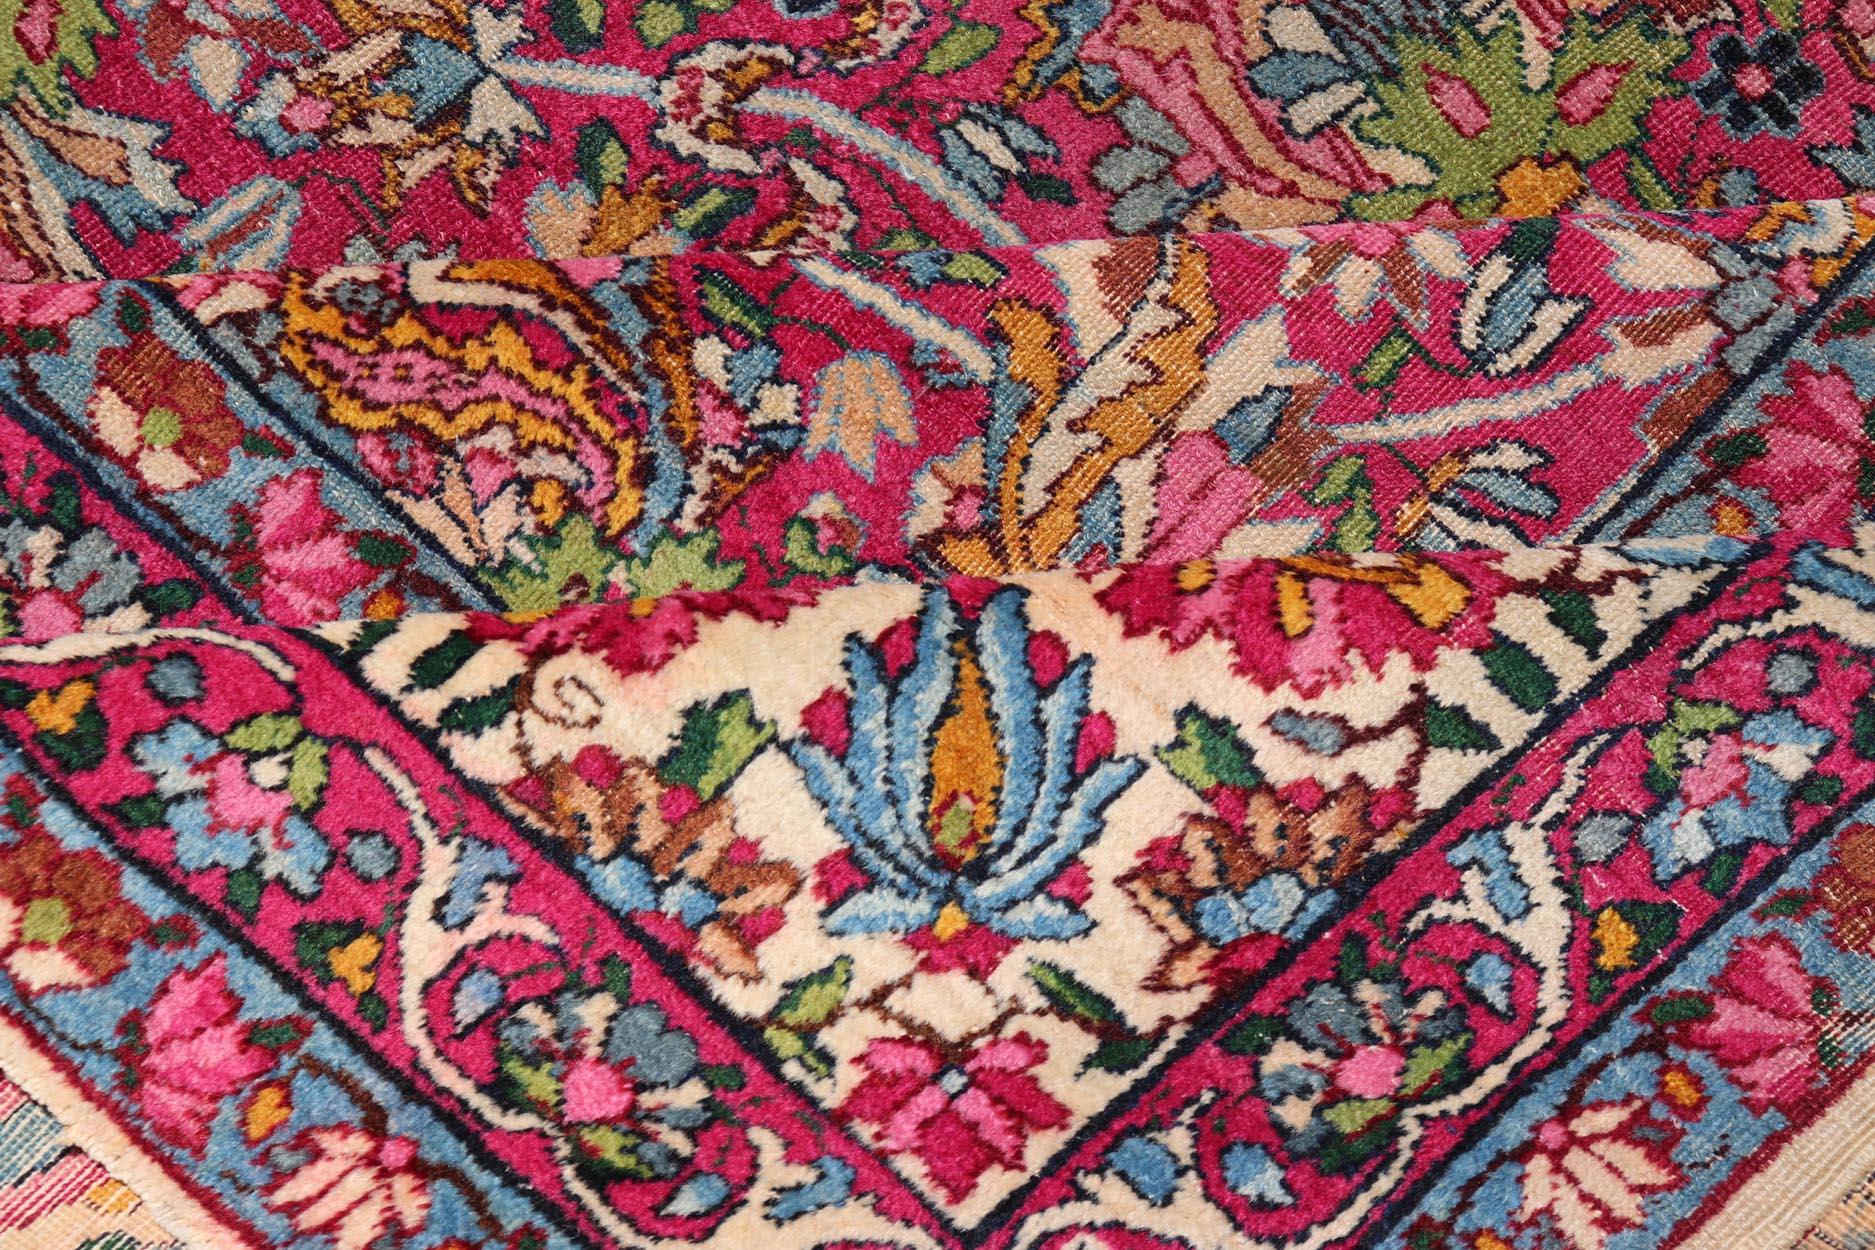  Antique Persian Lavar Kerman Rug with All-Over Floral Design In Jewel Tones  For Sale 3